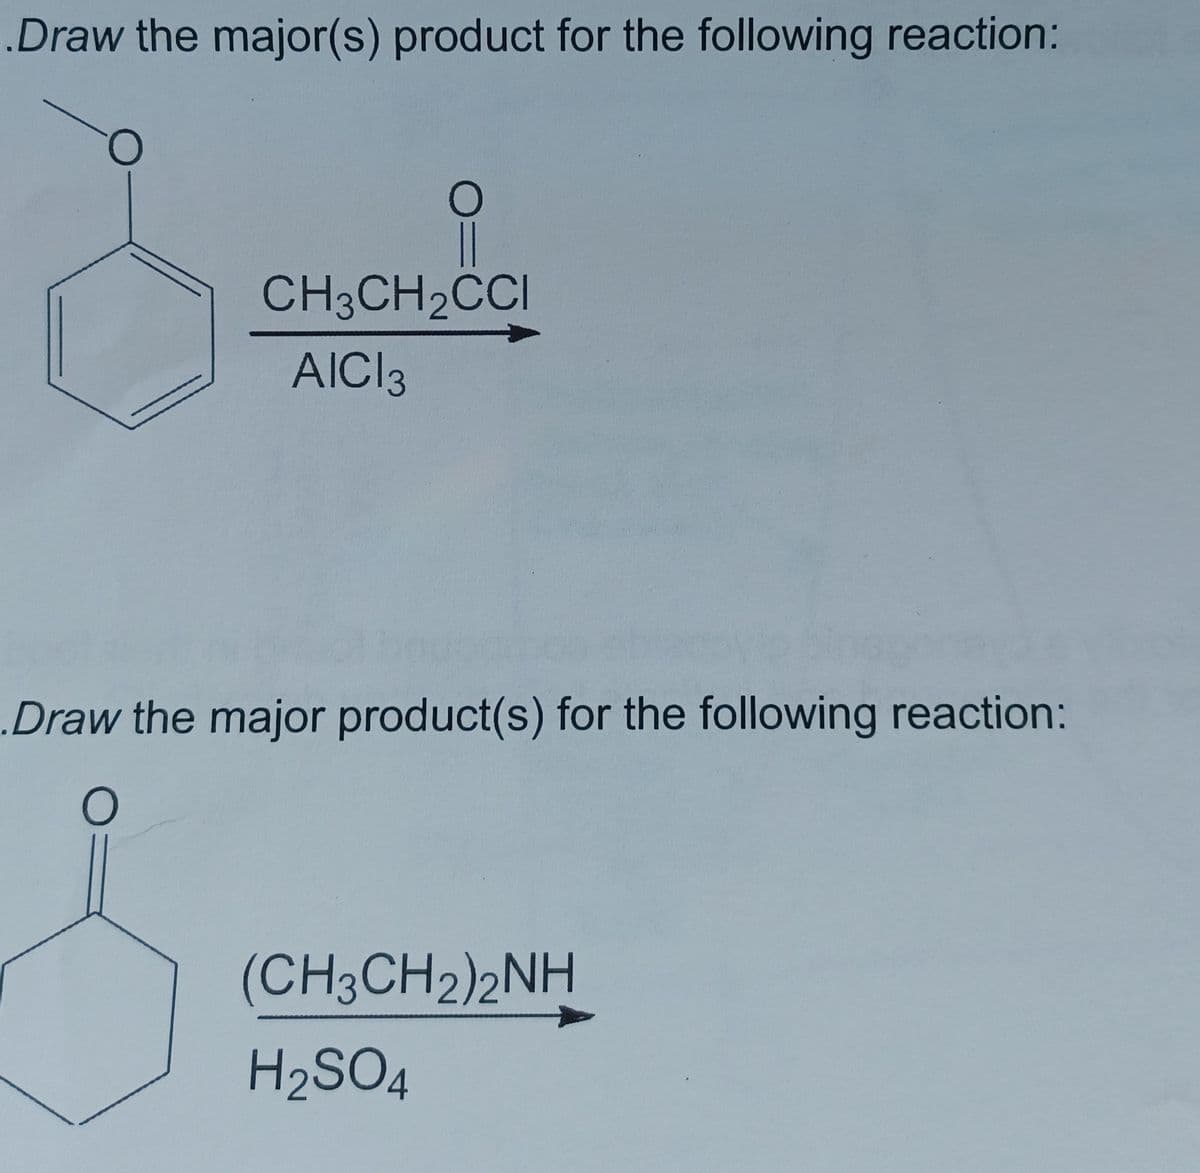 .Draw the major(s) product for the following reaction:
CH3CH2CCI
AIC13
.Draw the major product(s) for the following reaction:
(CH3CH2)2NH
H2SO4
